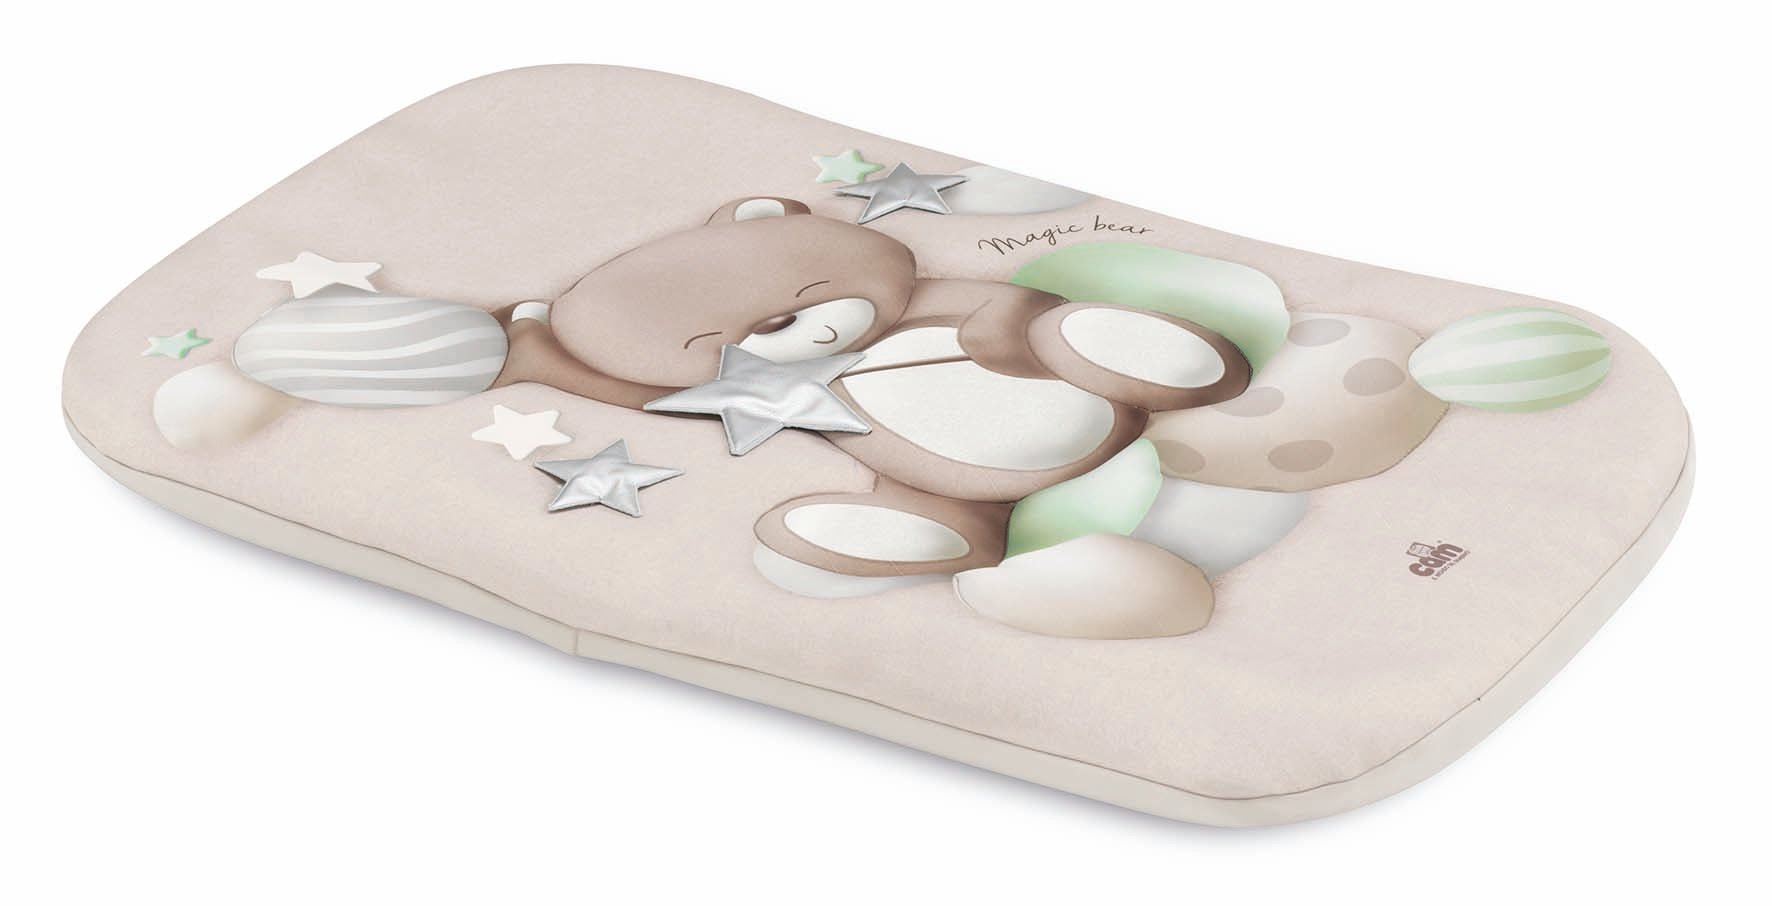 CAM Brevettato Playpen - Safe and Stimulating Space for Babies. Made in Italy and Sold in South Africa by CB Baby online.